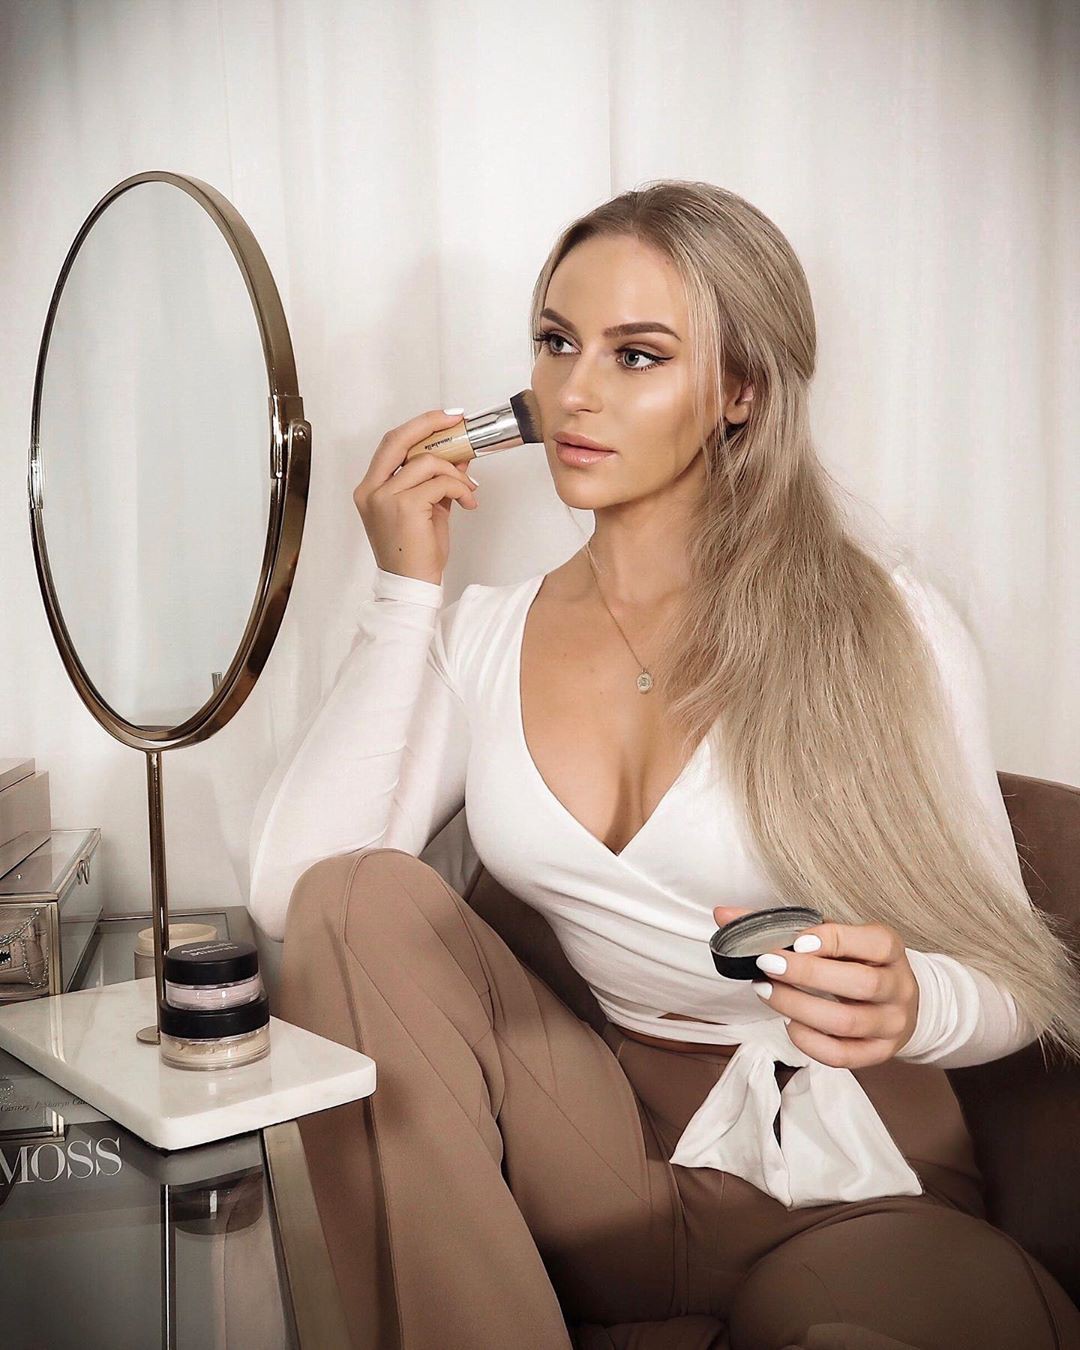 Anna Nystrom Instagram Pictures, Anna Nystrom, My Favorite Mineral: Photo shoot,  Anna Nystrom  